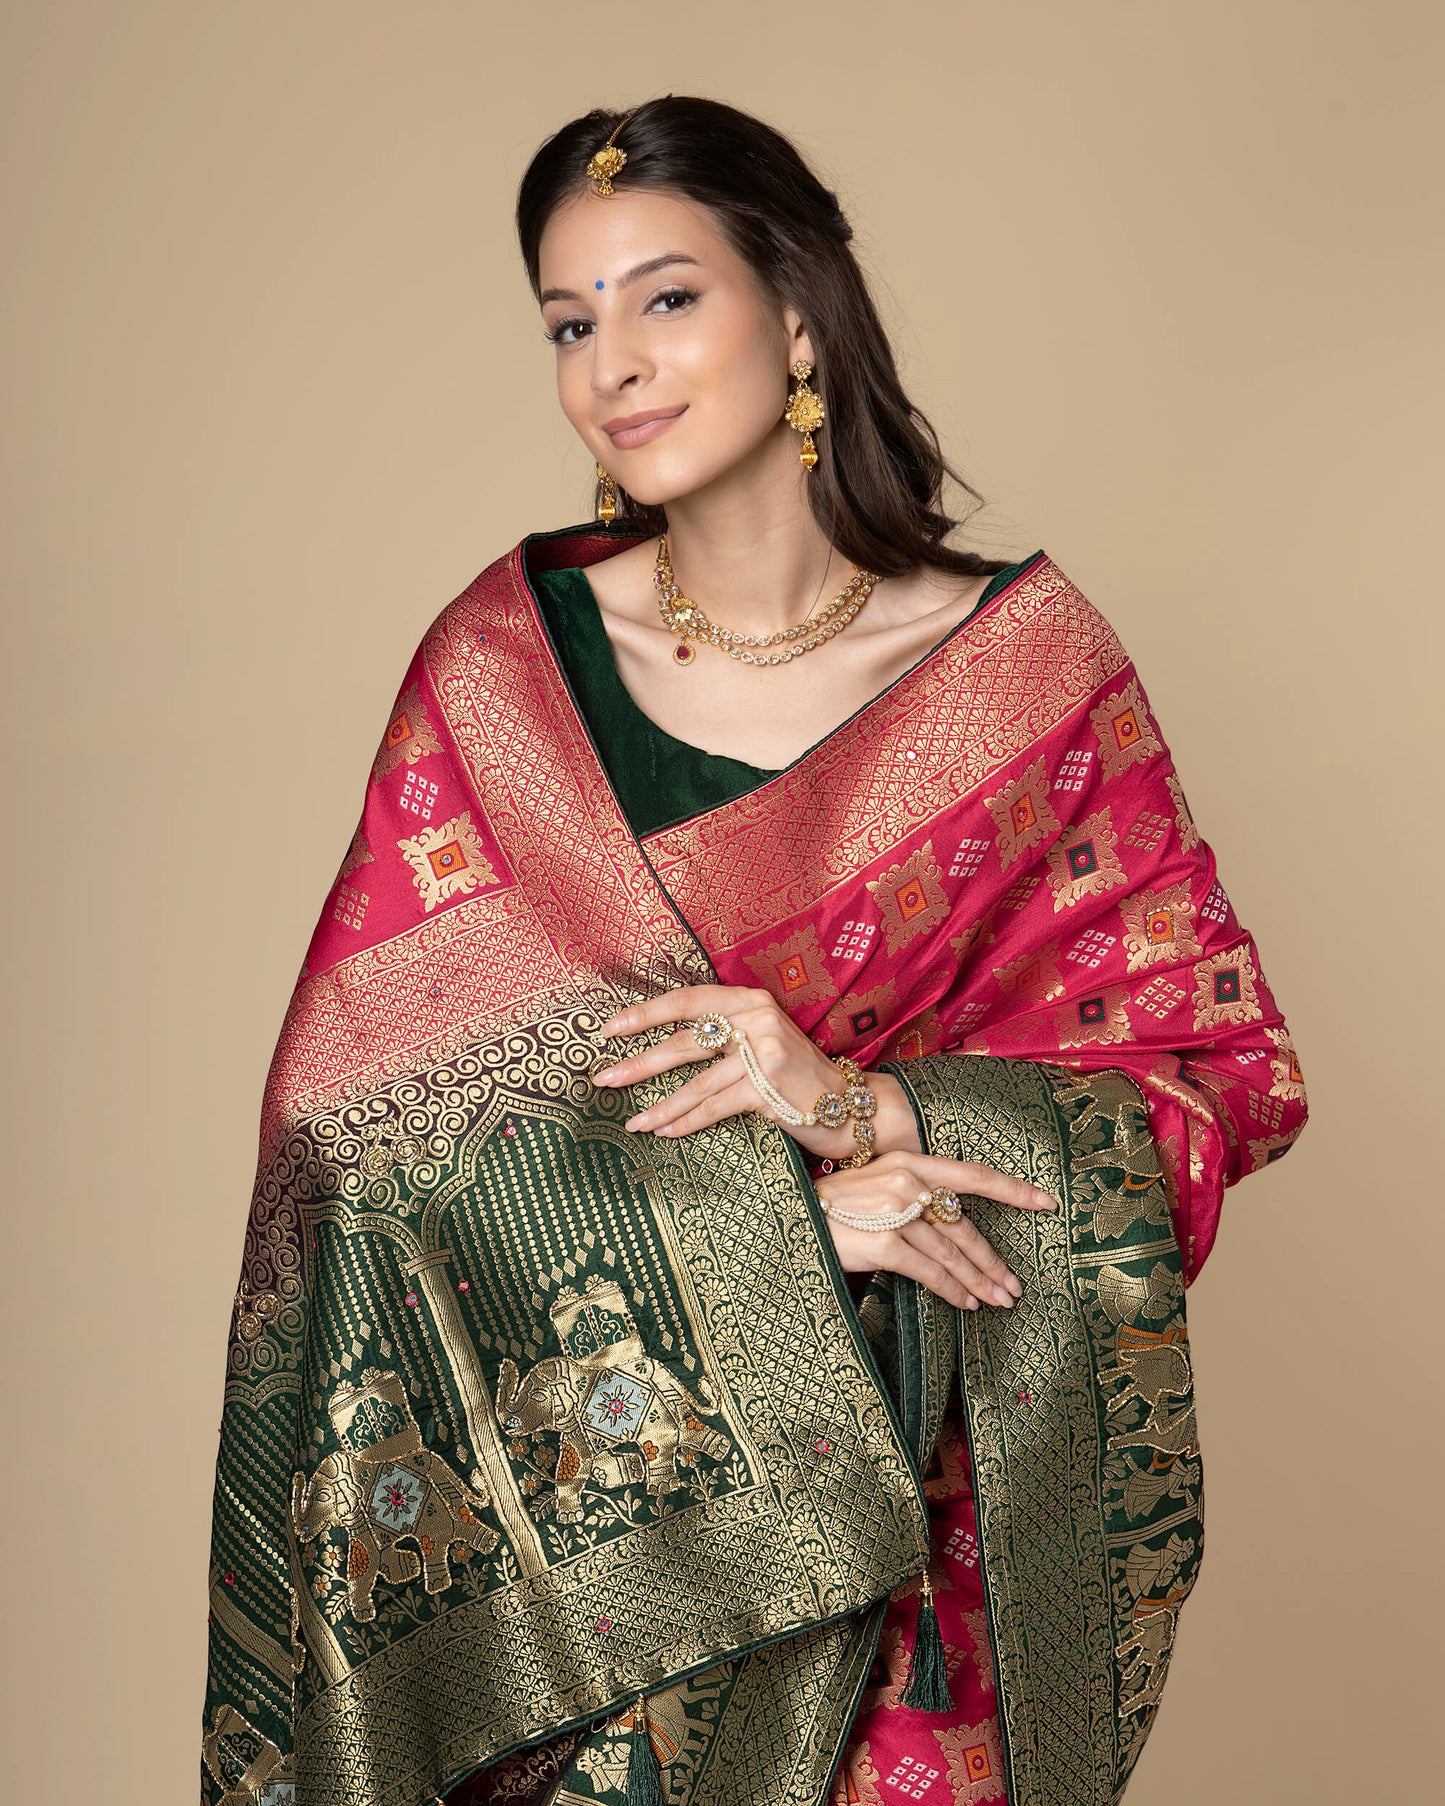 Pink Bandhani Jacquard Work With Delica Beads Exclusive Gharchola Silk Saree